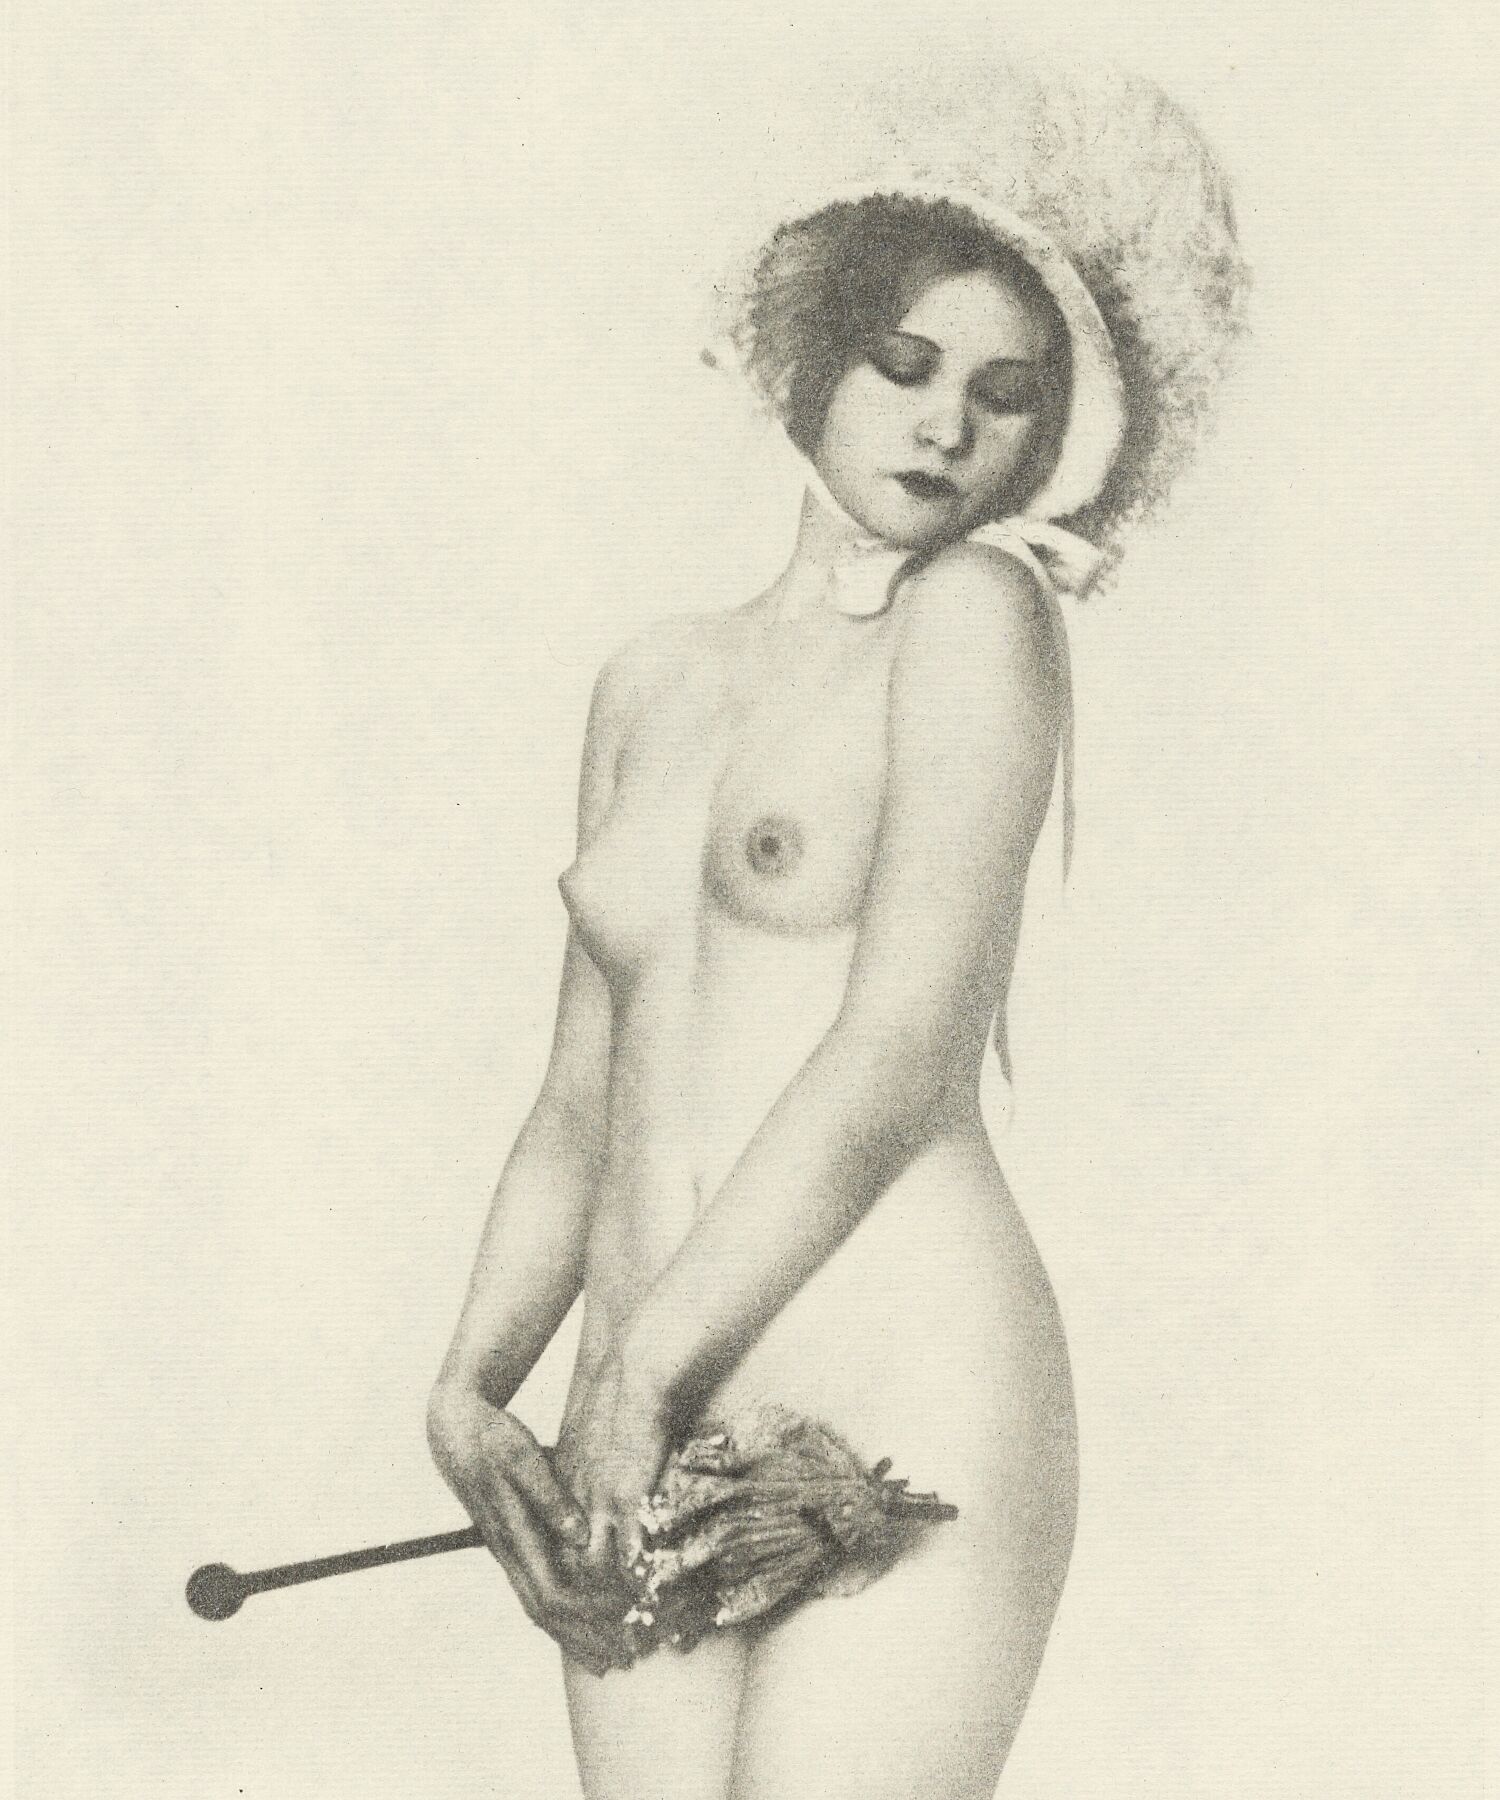 Female Nude Wearing Bonnet and Holding a Parasol by Arthur F. Kales - c.1920